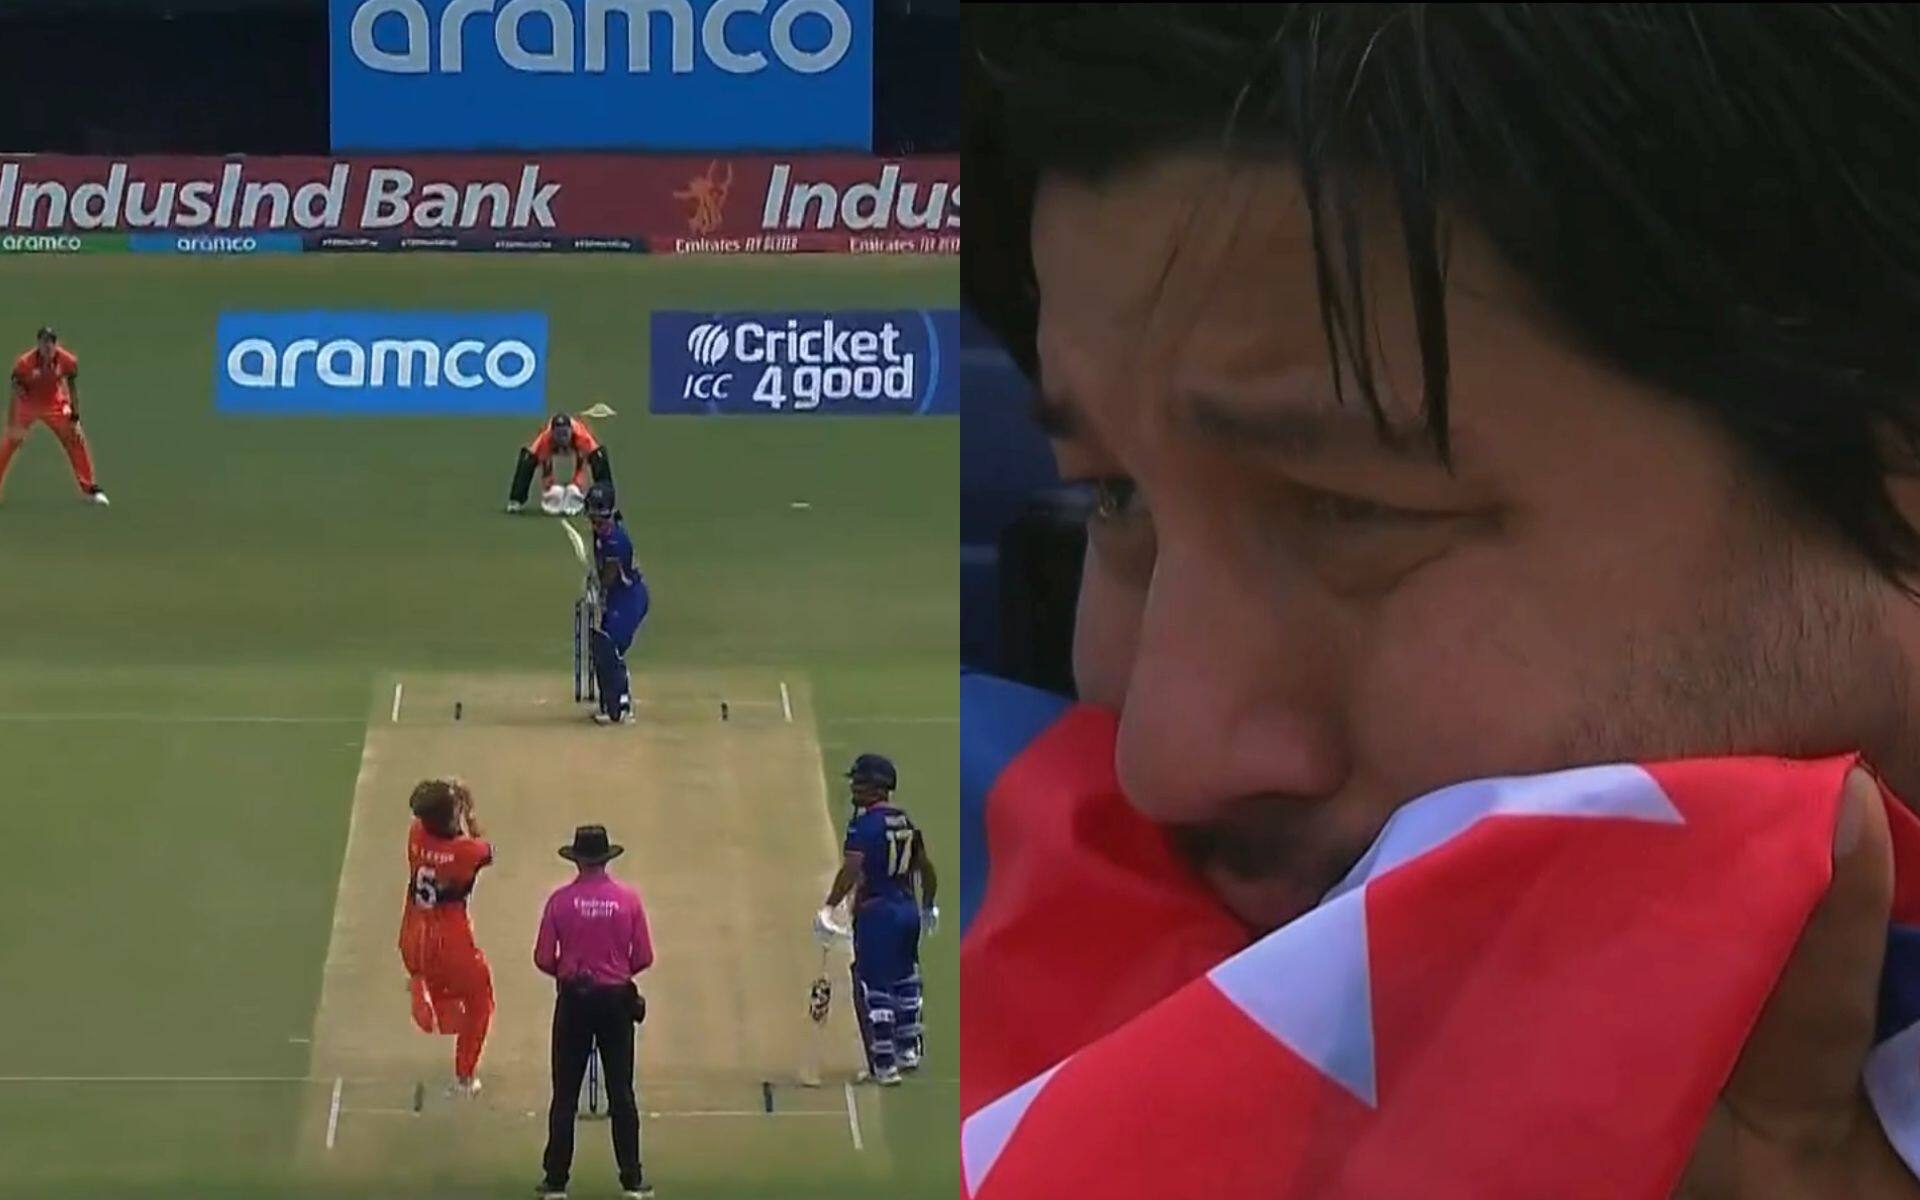 Nepal fan cries after Dipendra Singh Airee's wicket vs NED (x.com)